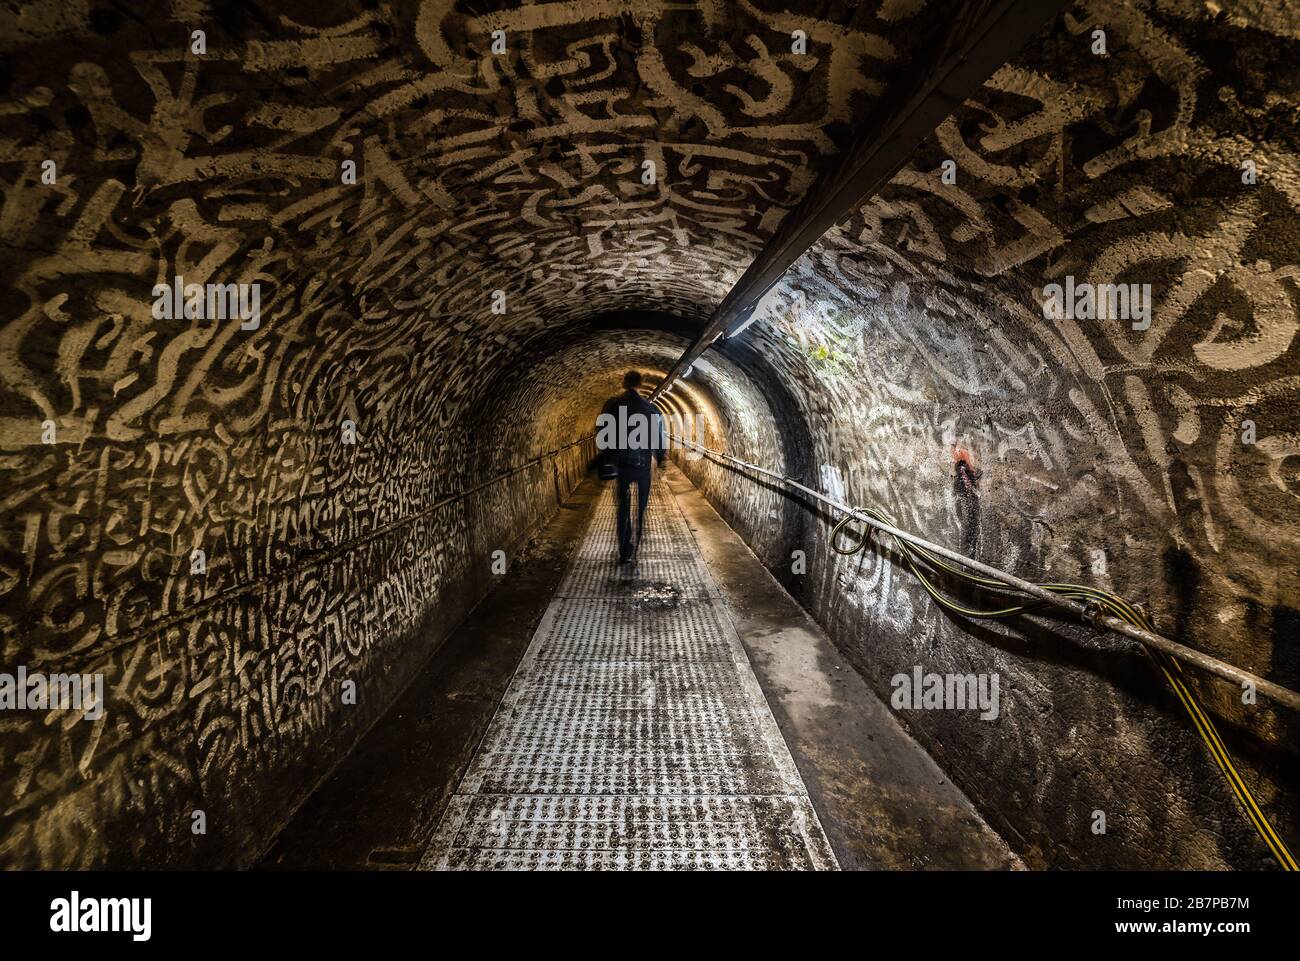 Anderlecht, Brussels / Belgium - 07 16 2019: Man walking in the industrial interiors of the sewer museum main tunnel of the Chaussée de Mons Stock Photo